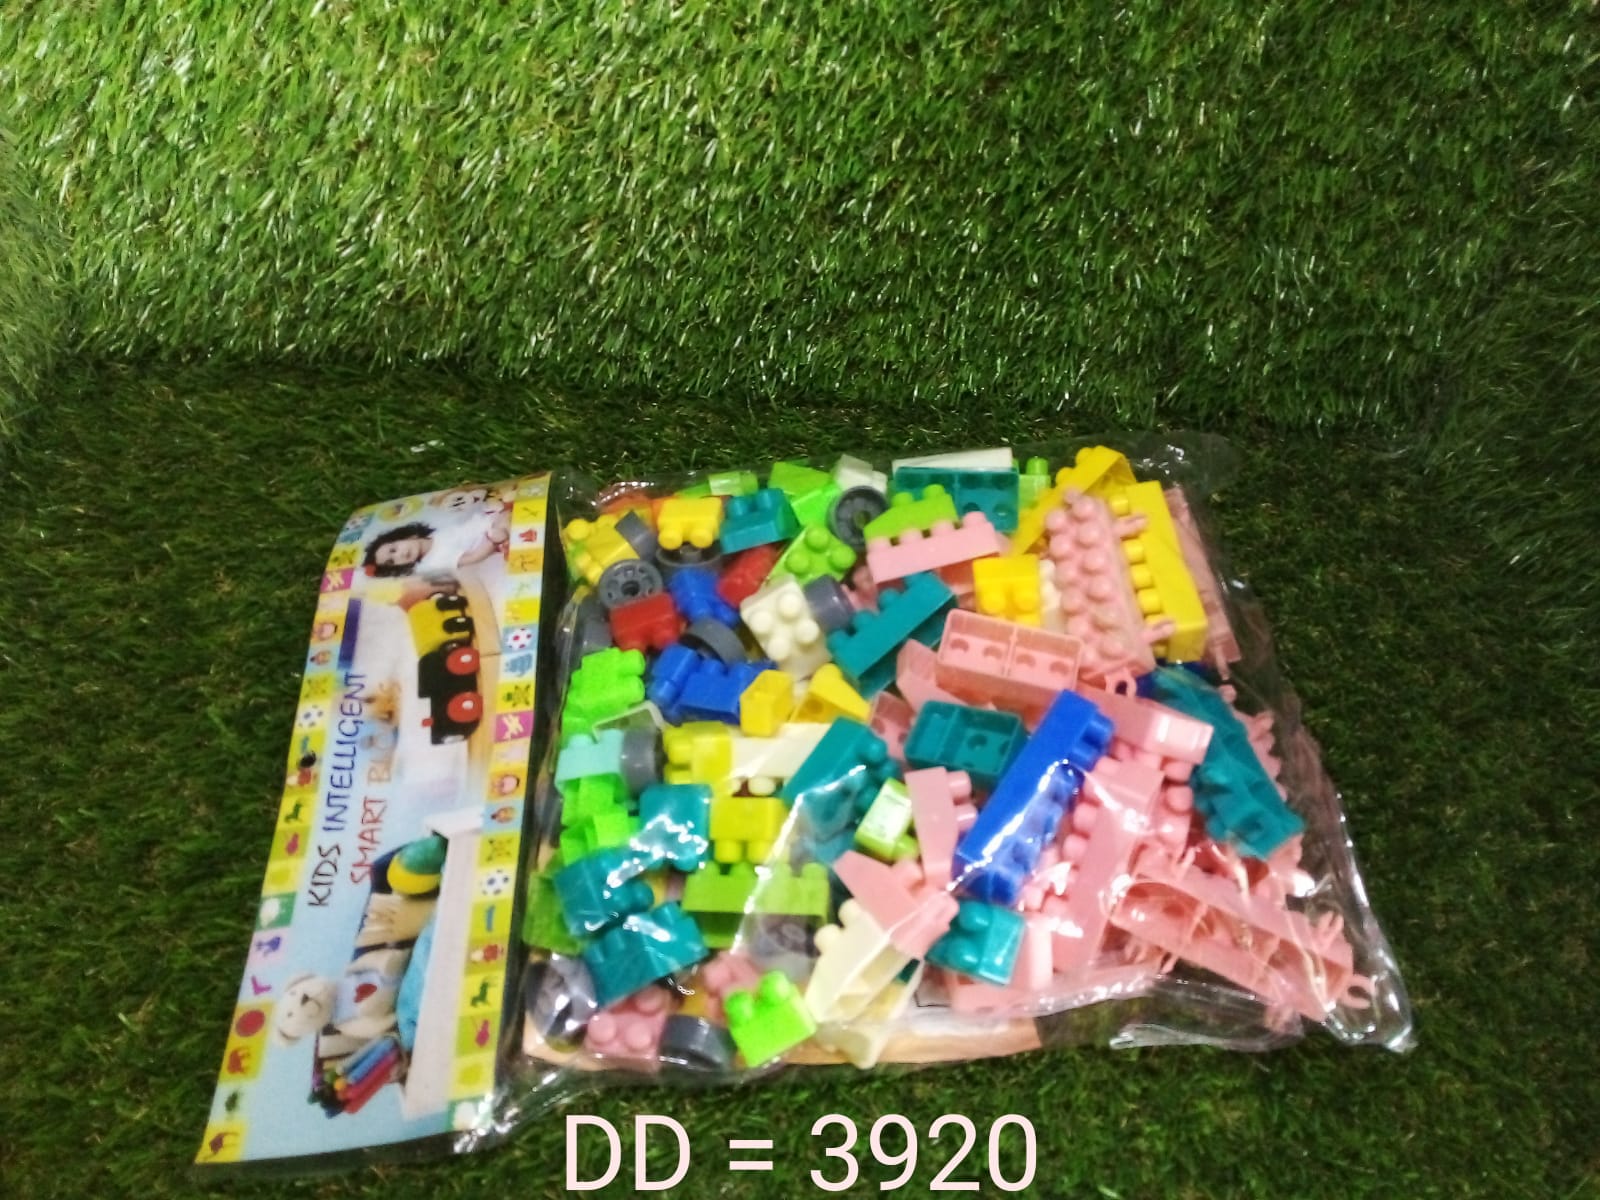 3920 200 Pc Train Candy Toy used in all kinds of household and official places specially for kids and children for their playing and enjoying purposes.